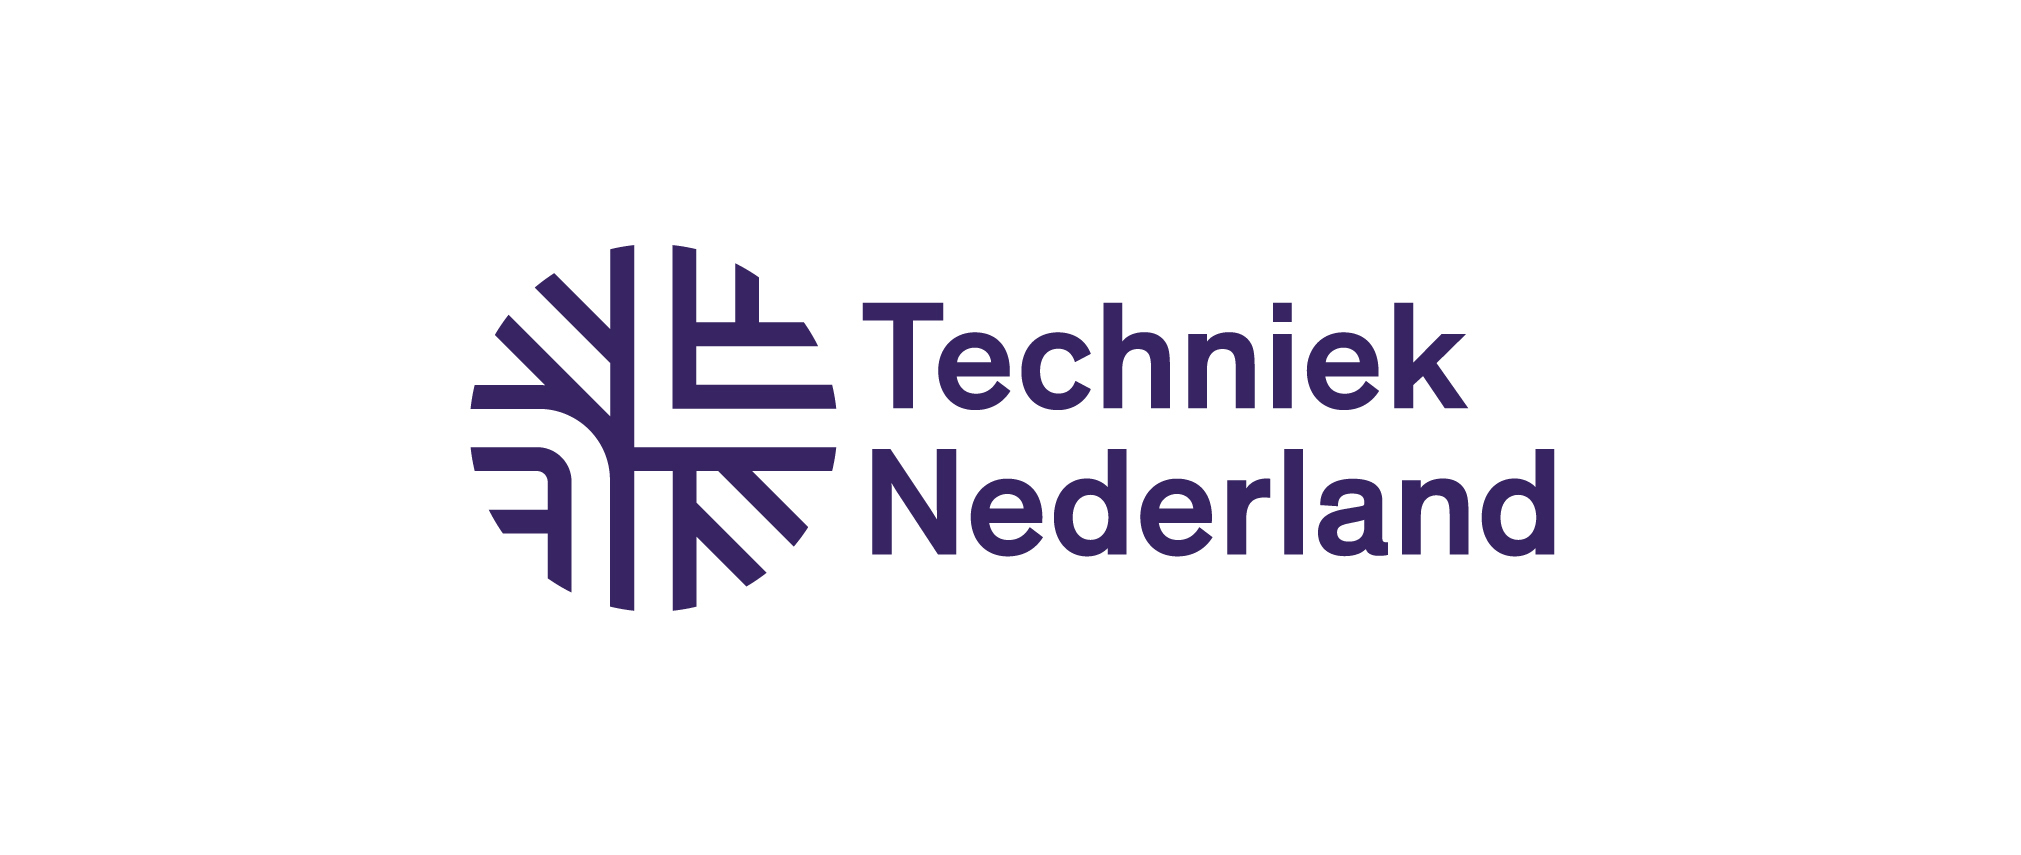 The technology that drives the netherlands